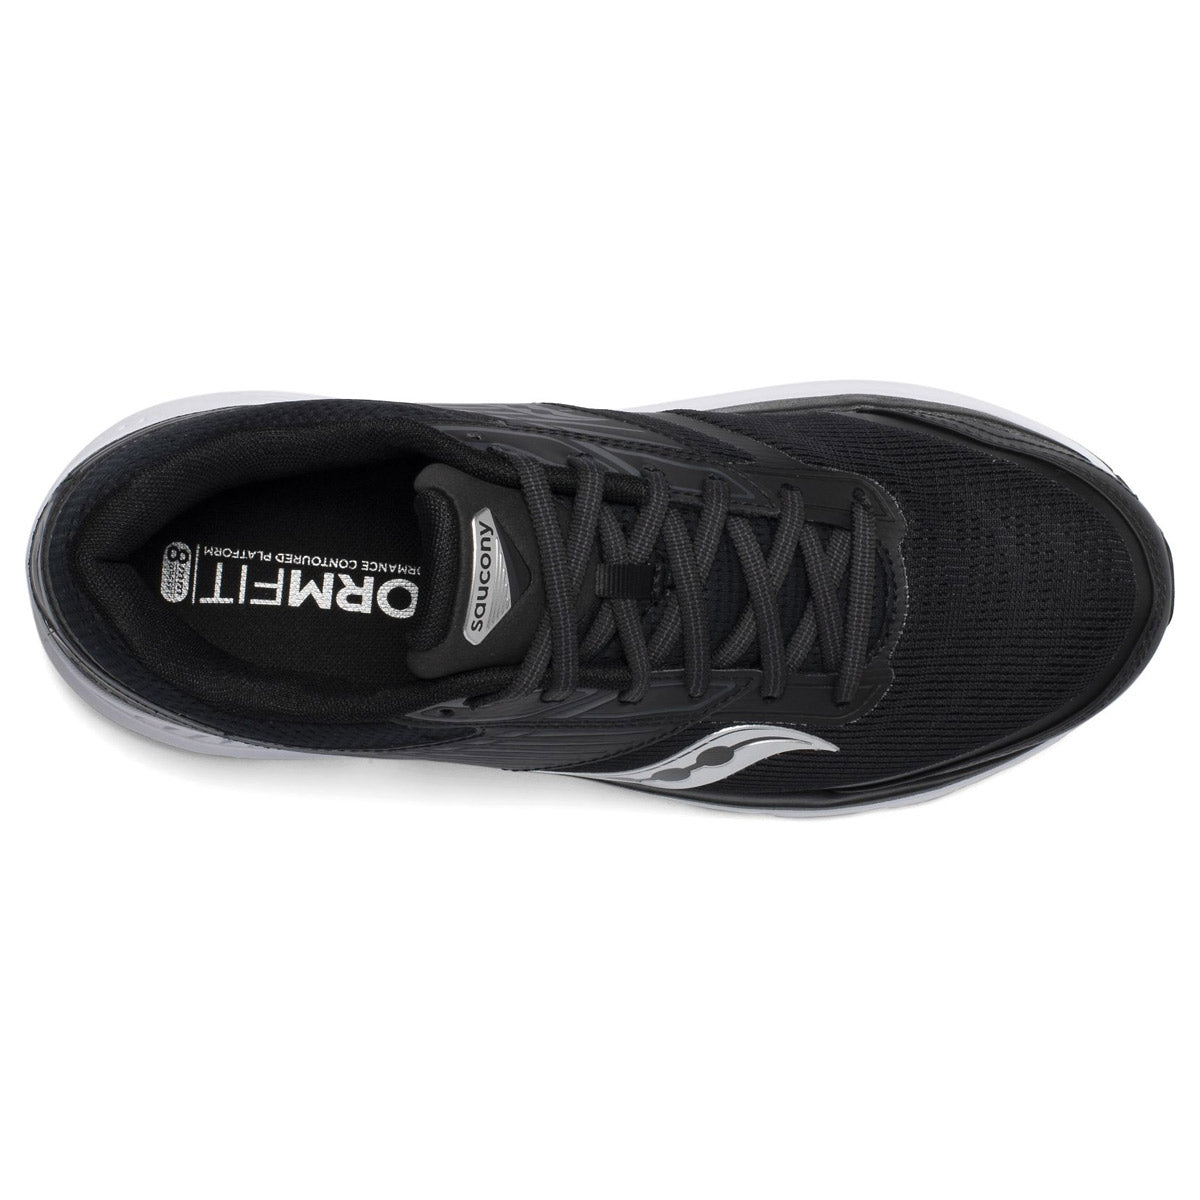 Top view of a single black and white Saucony Echelon 8 running shoe.